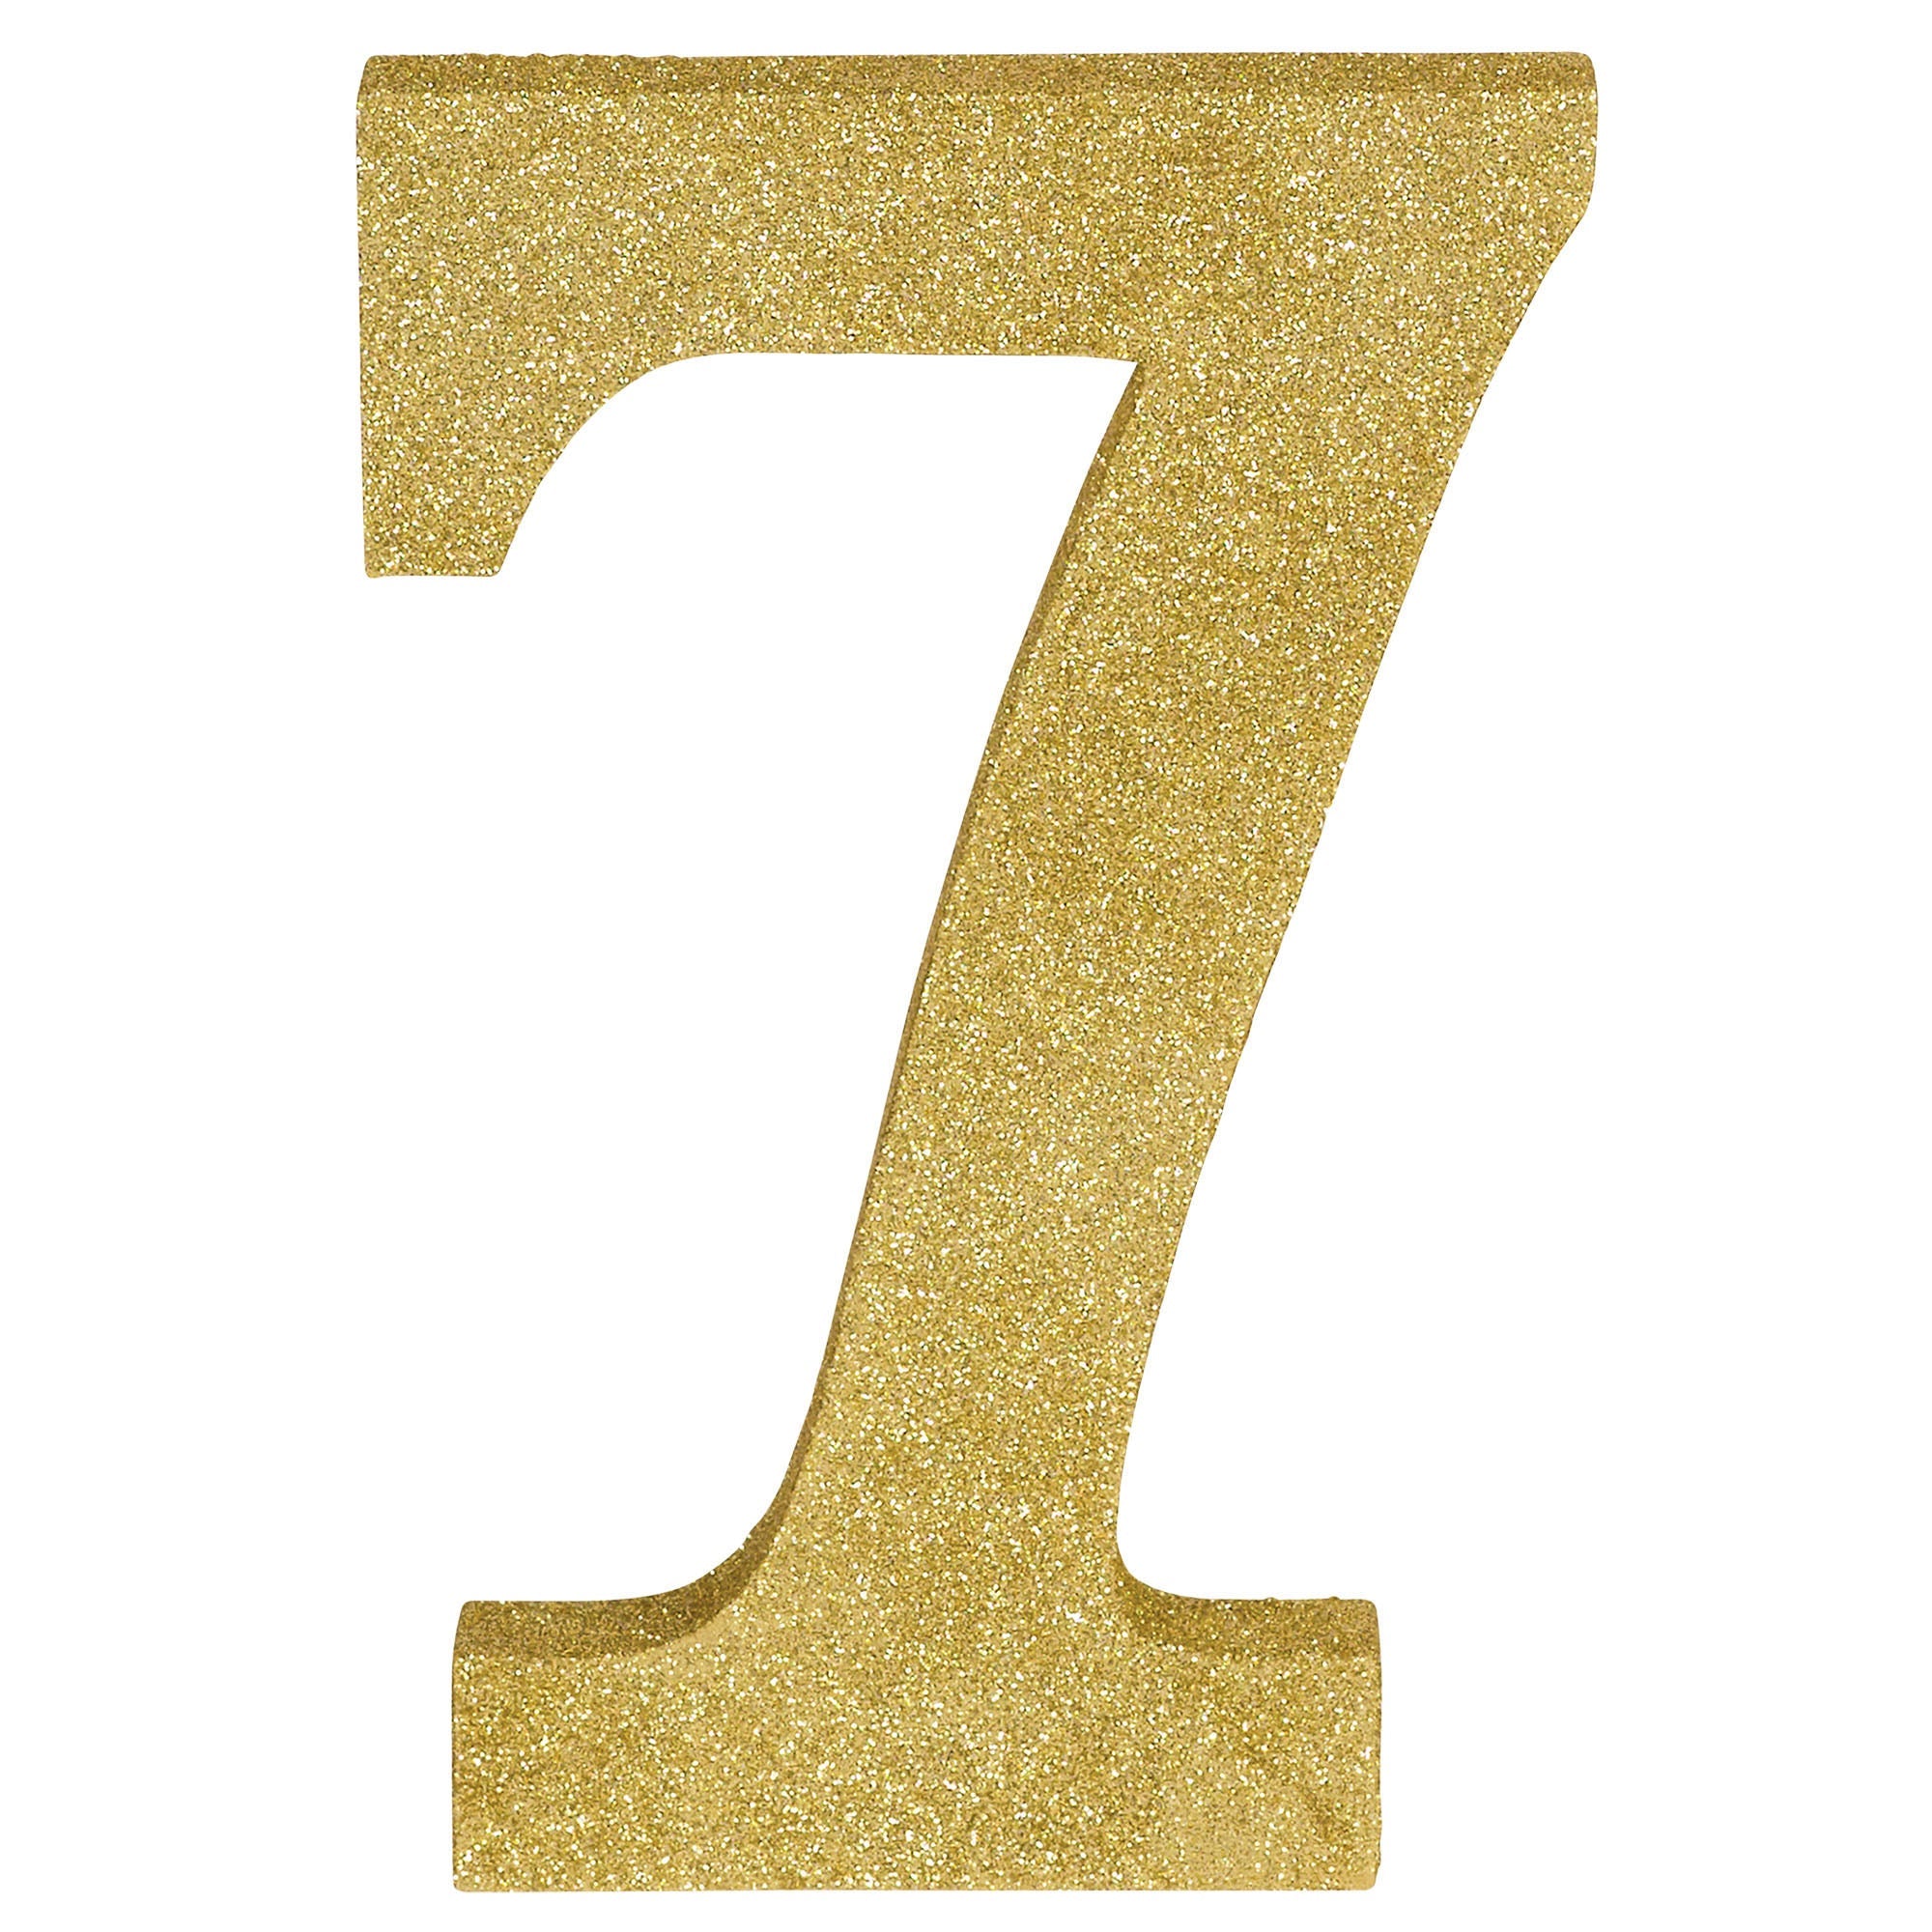 Number 7 Glitter MDF Decoration  Gold  8.875x5.875x1in